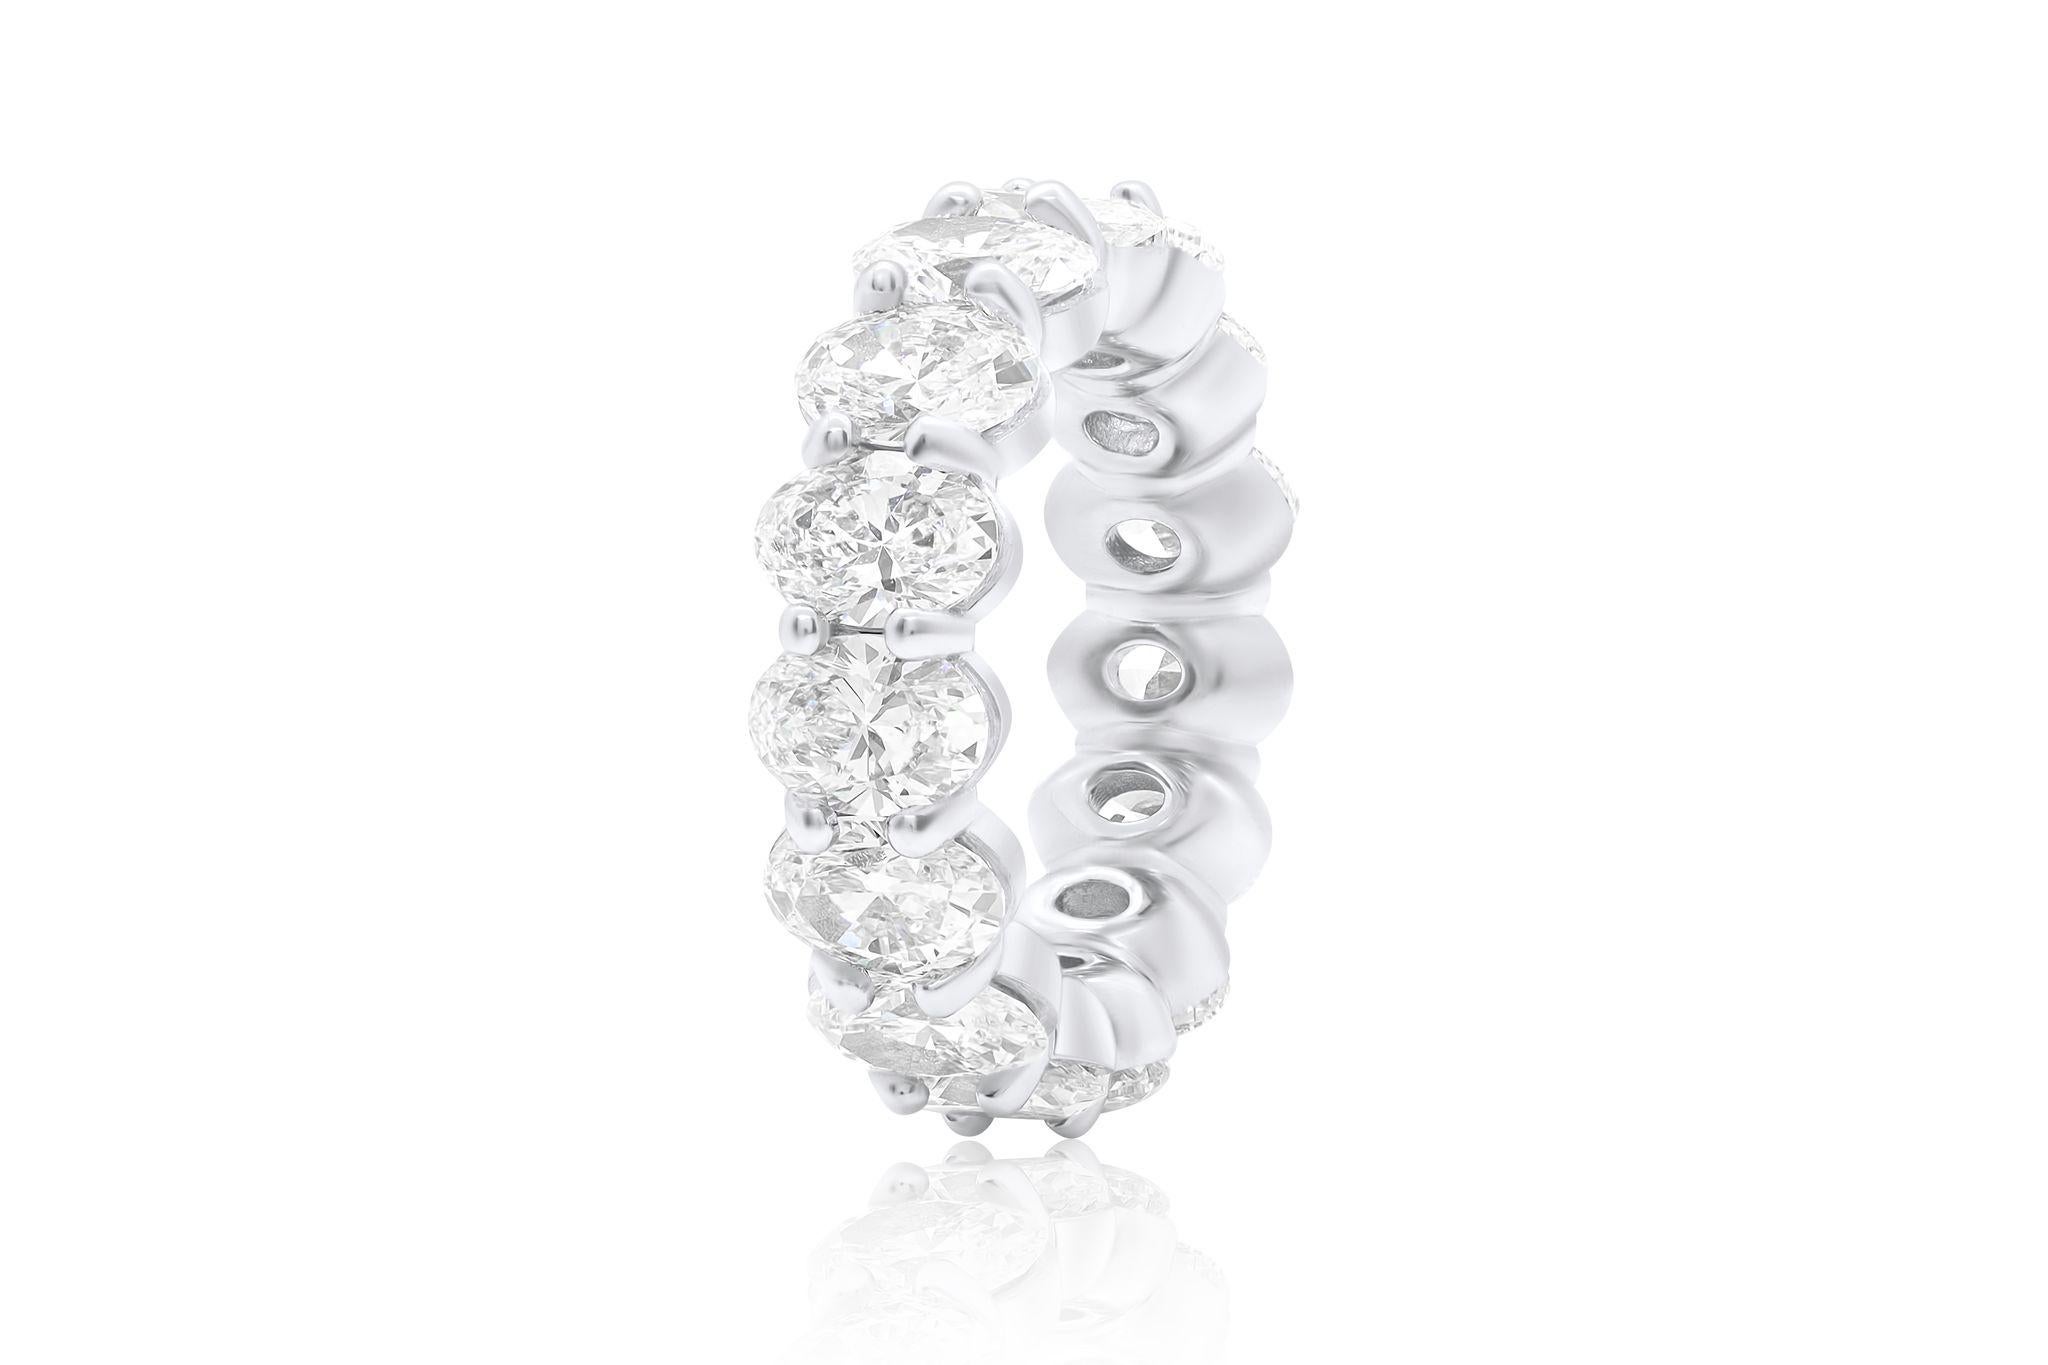 Modern Diana M. PLATINUM WENDDING BAND 18 STONES TOTAL 6.15CTS  OVAL SHAPE DIAMONDS For Sale